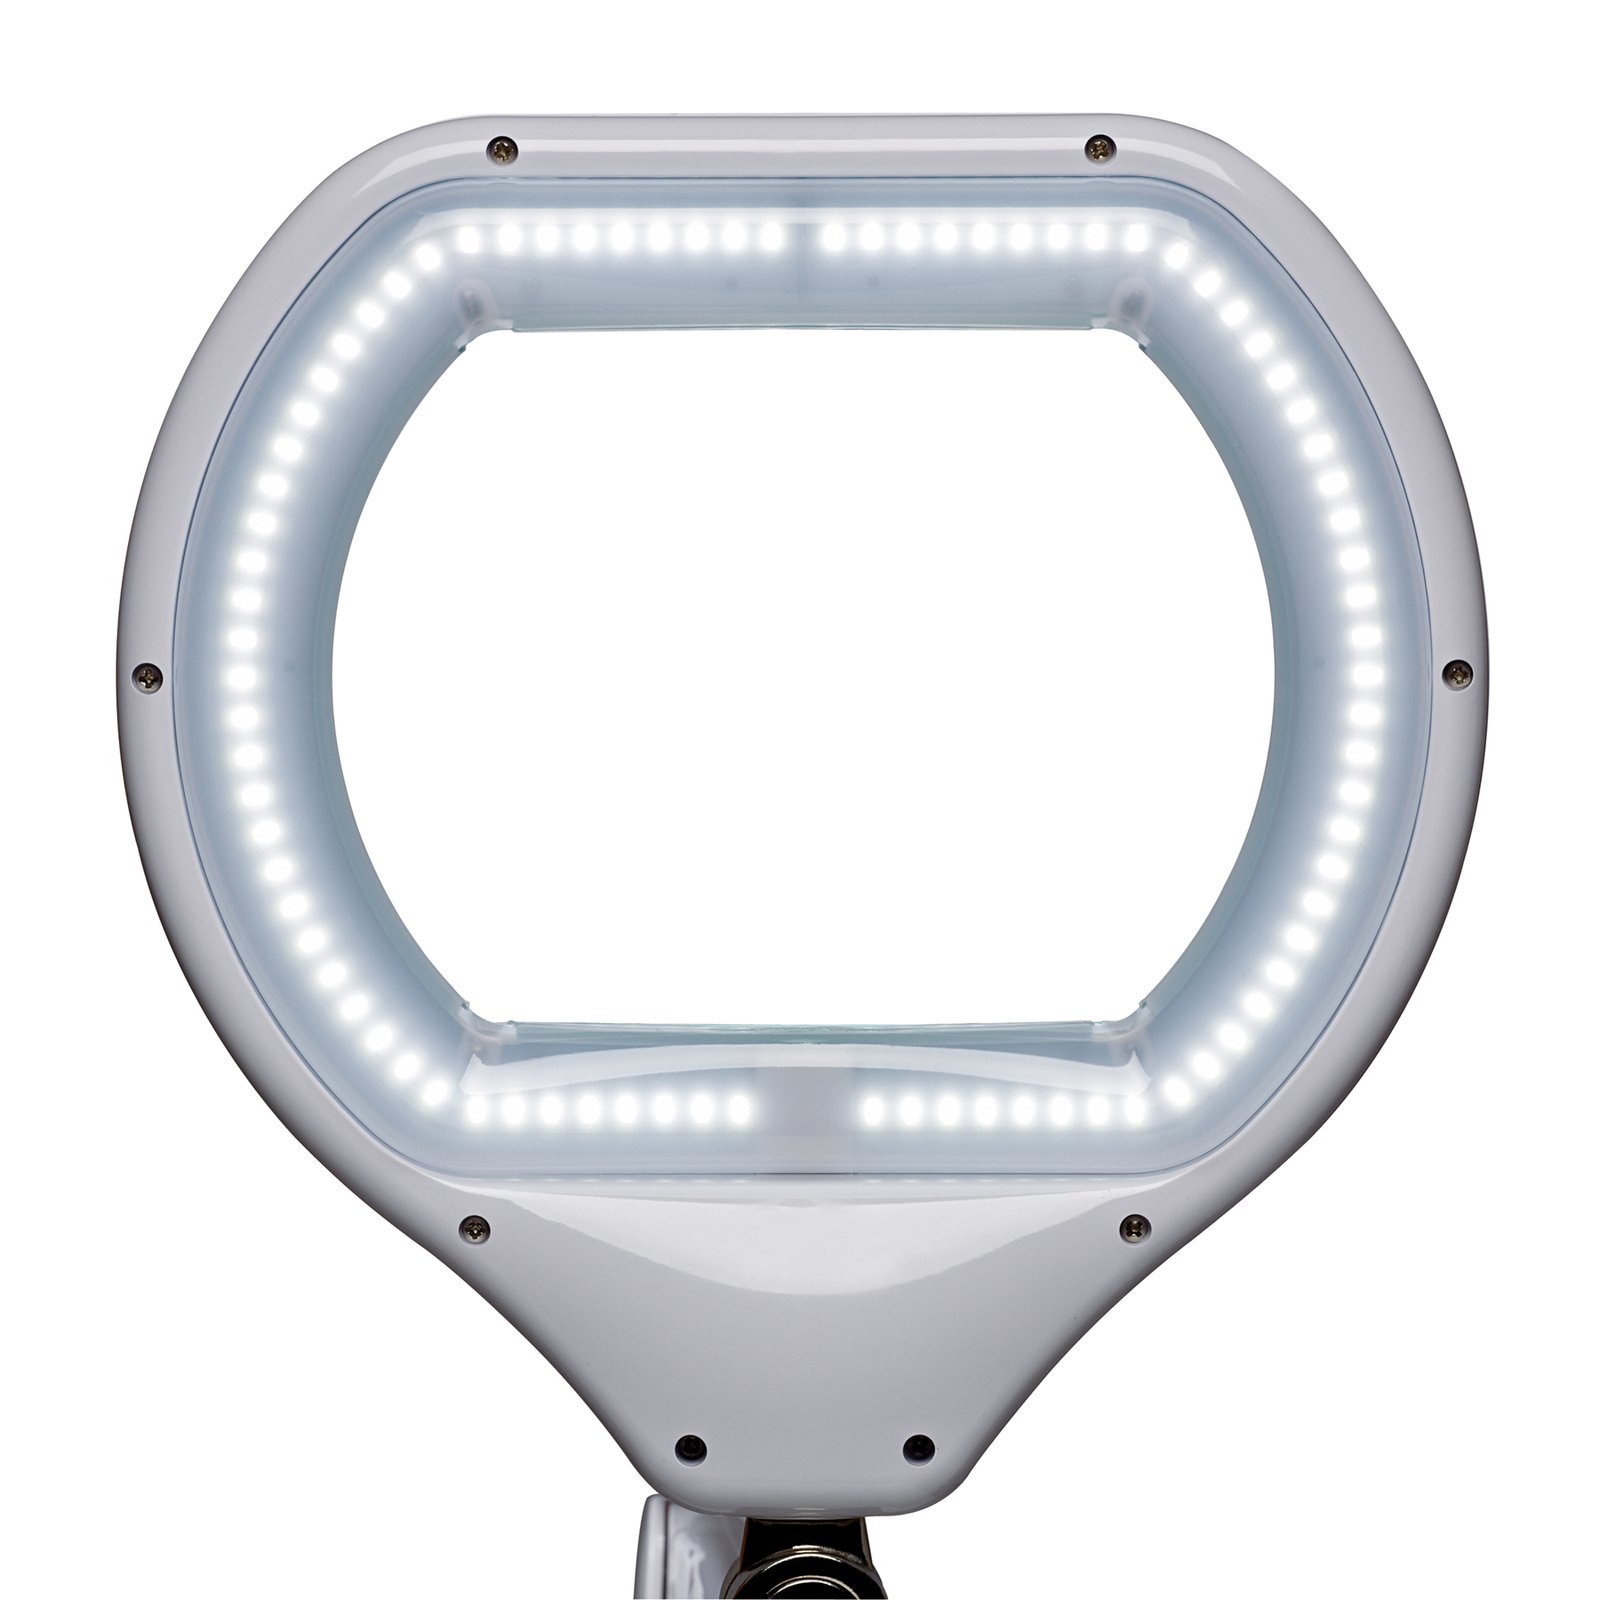 LED-Lupenleuchte MAULcrystal mit Klemme, dimmbar